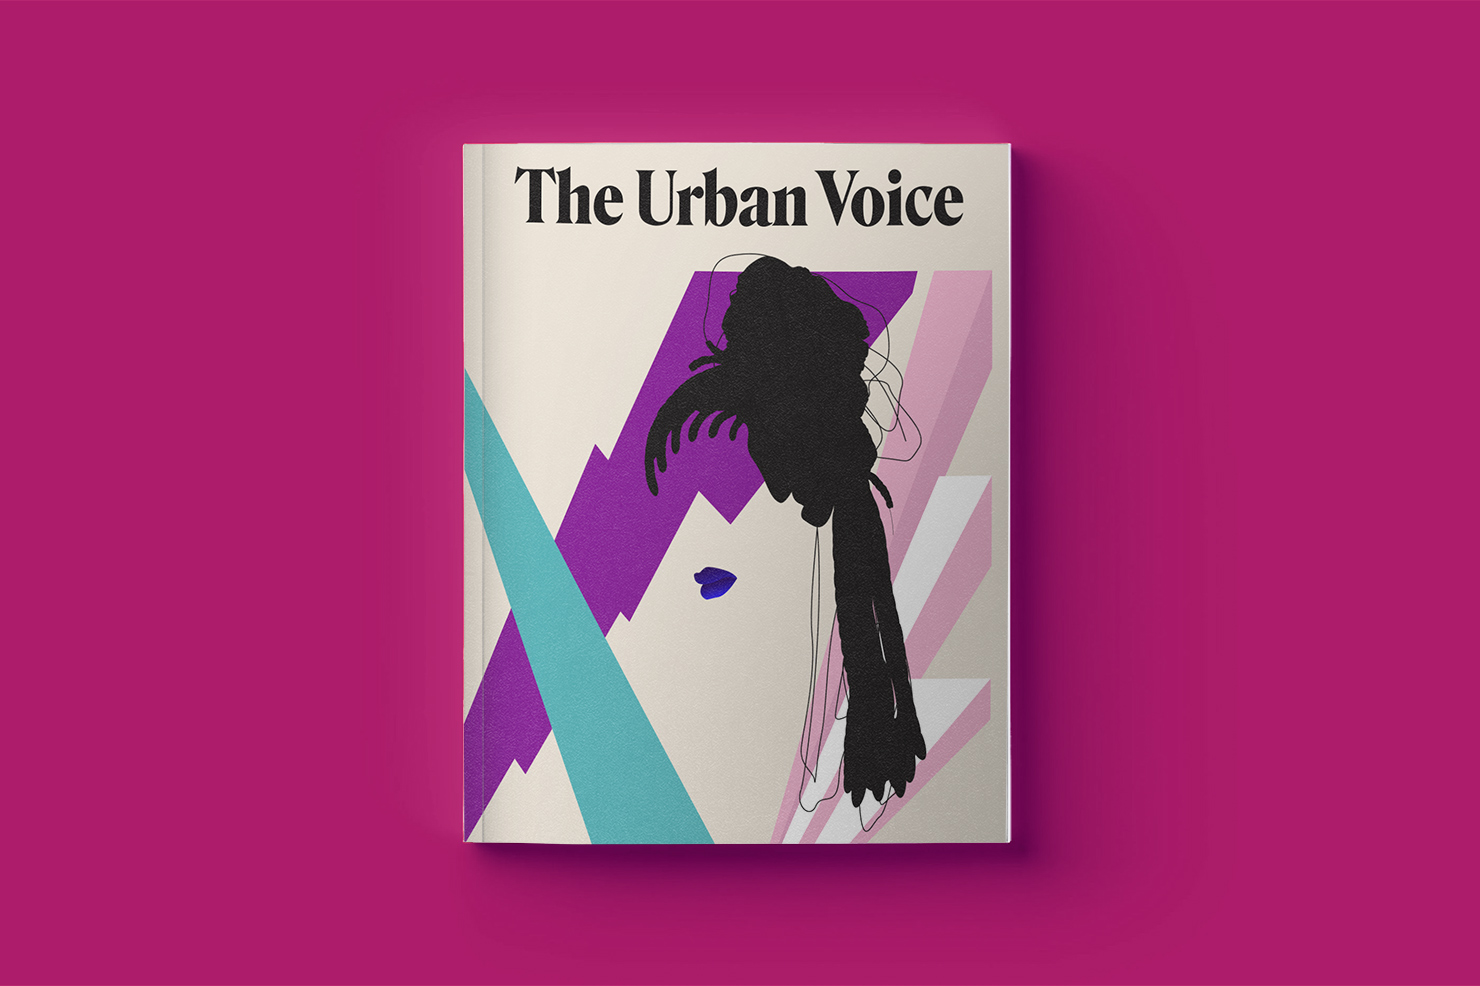 The Urban Voice printed cover design